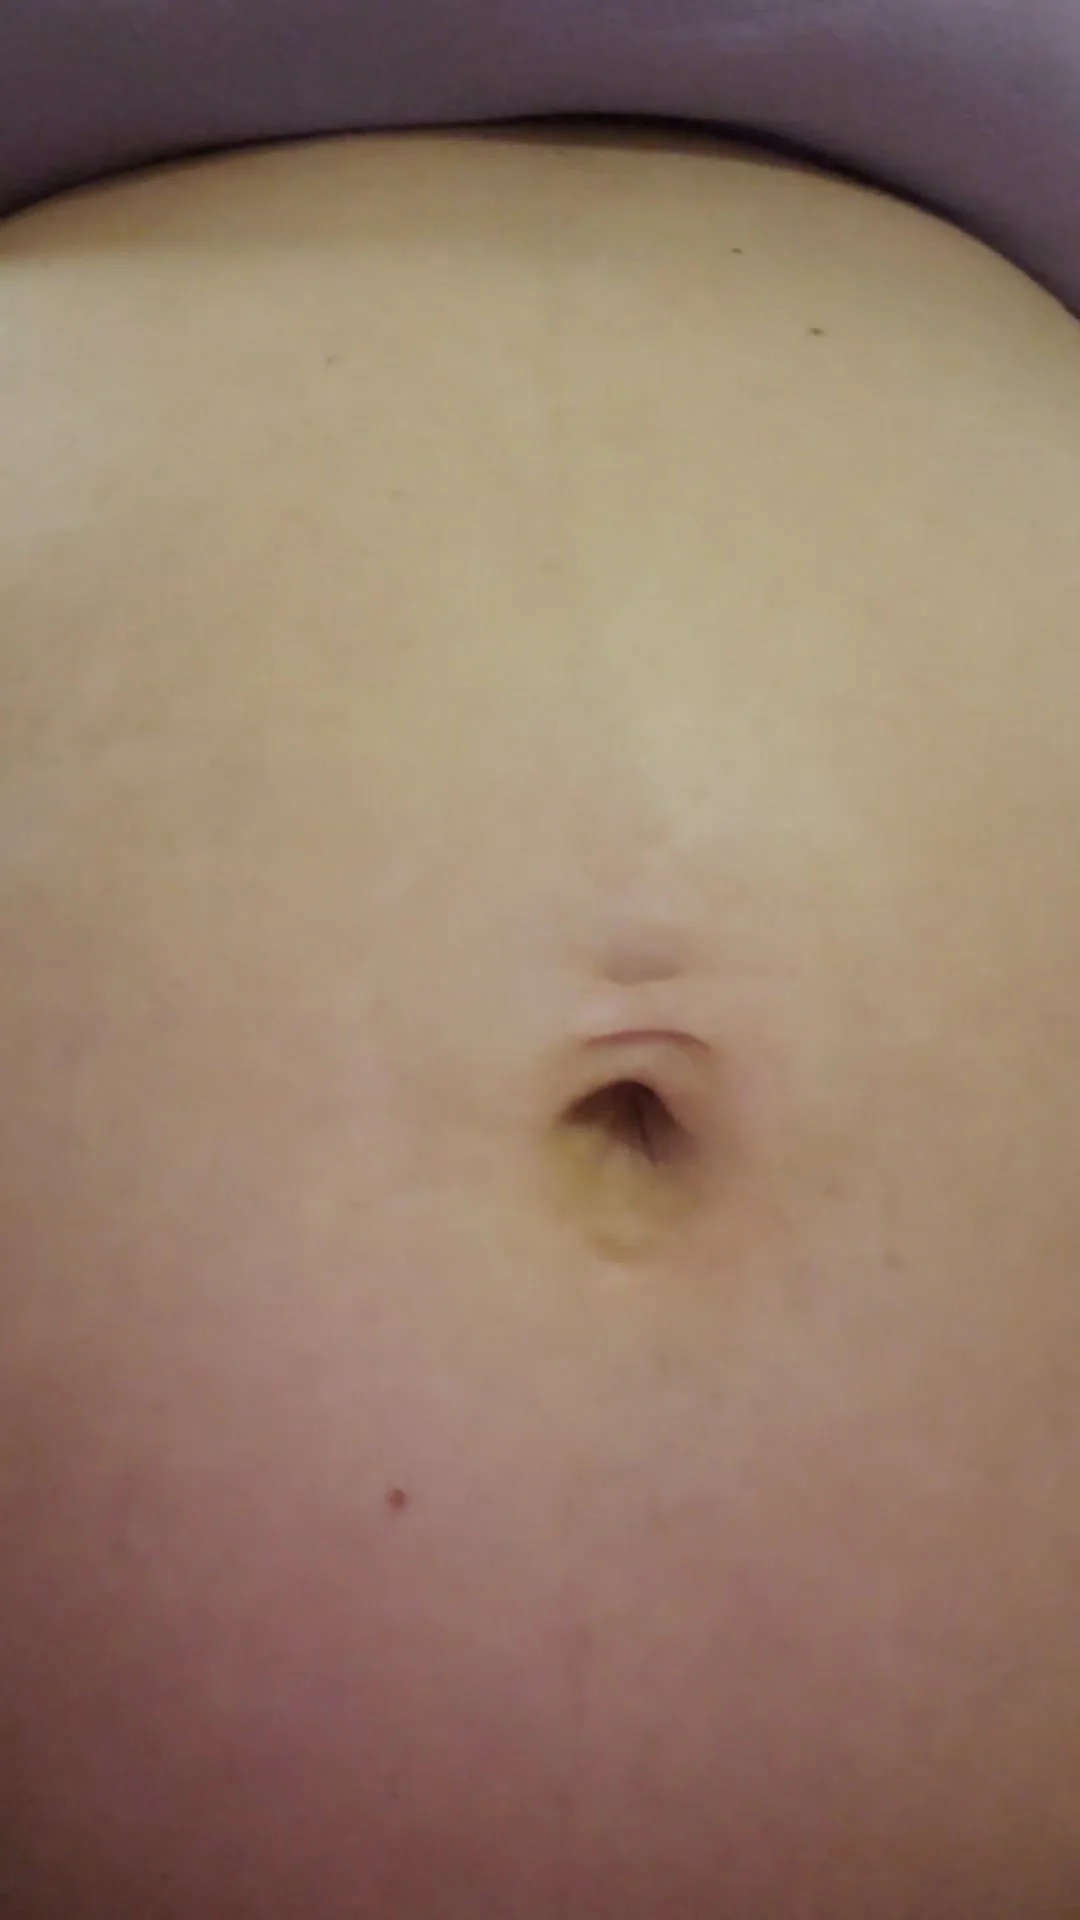 1080px x 1920px - Pregnant belly button fucker 1 - ThisVid.com